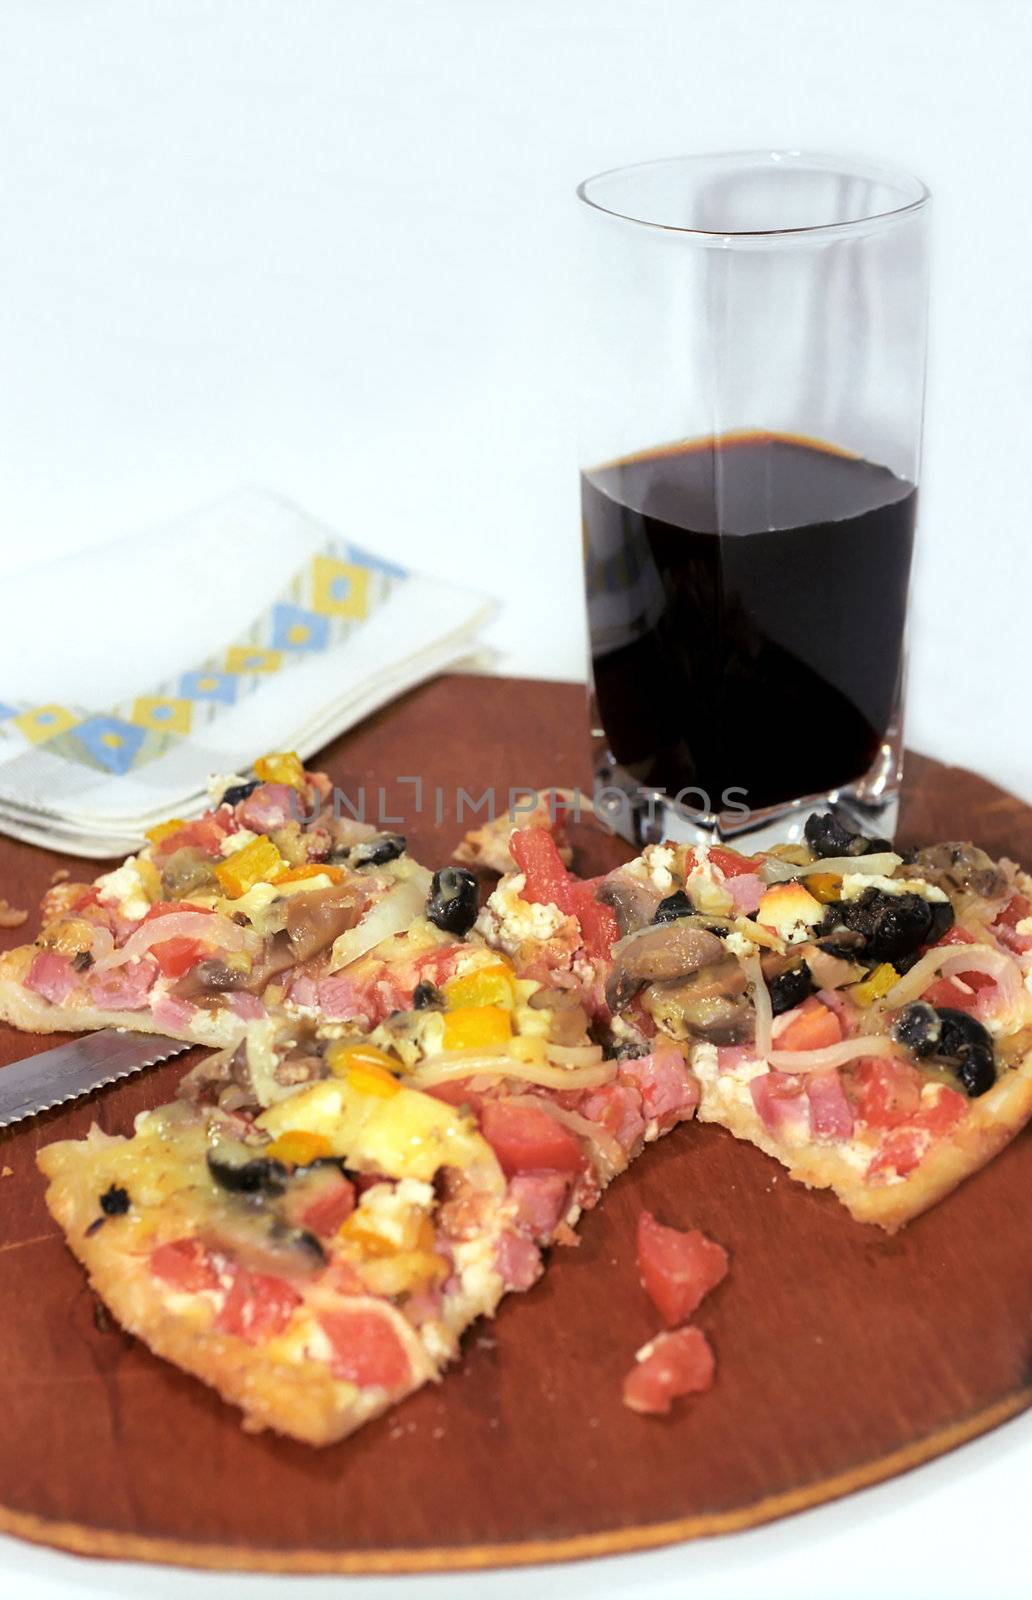 Cutting pizza and dark drink glass  by mulden